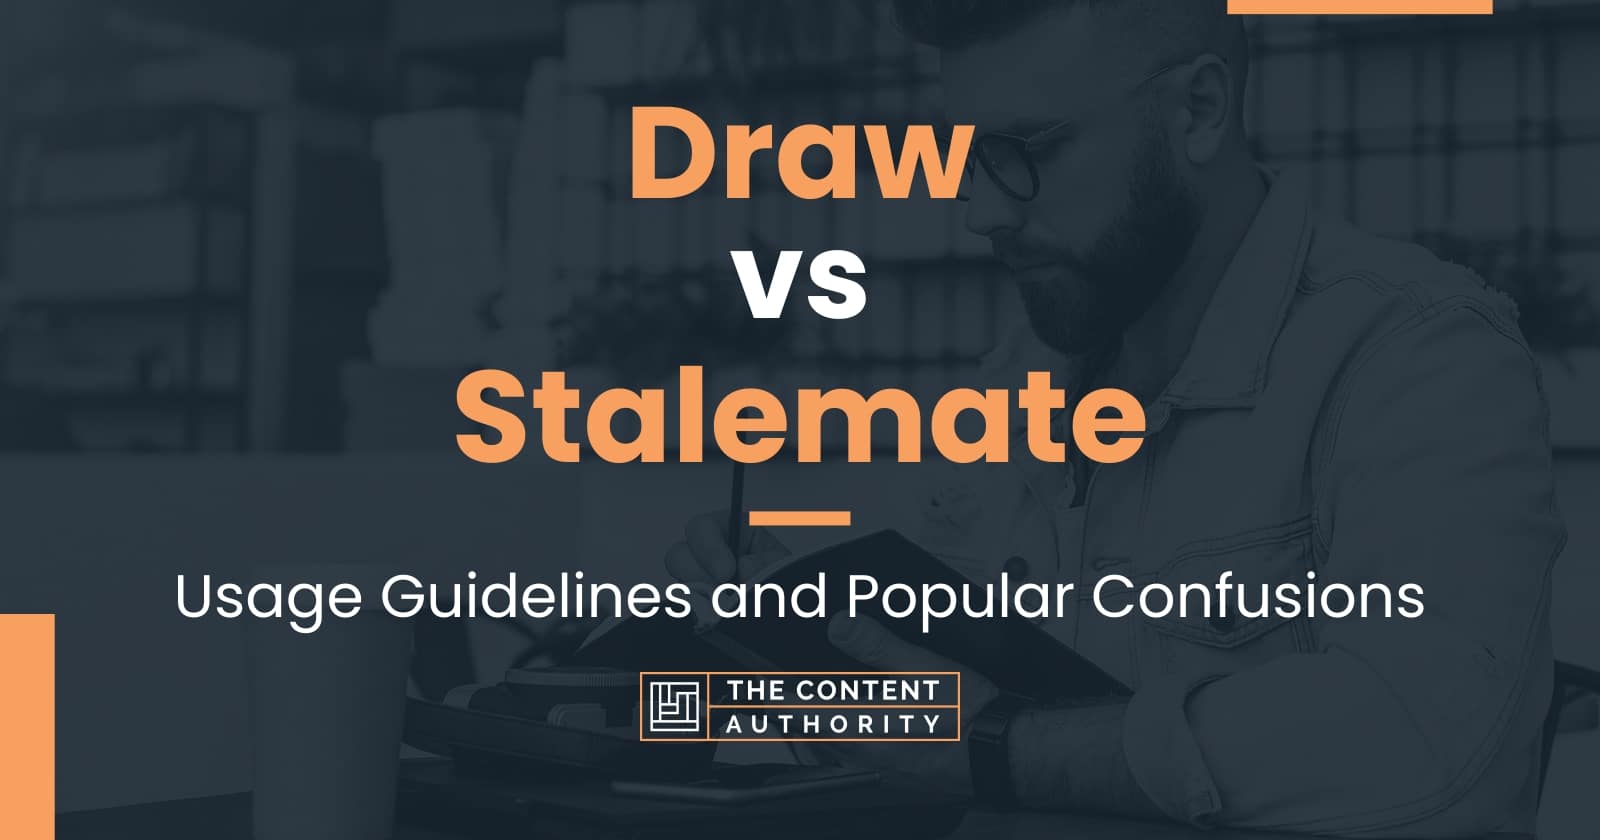 Draw vs Stalemate Usage Guidelines and Popular Confusions